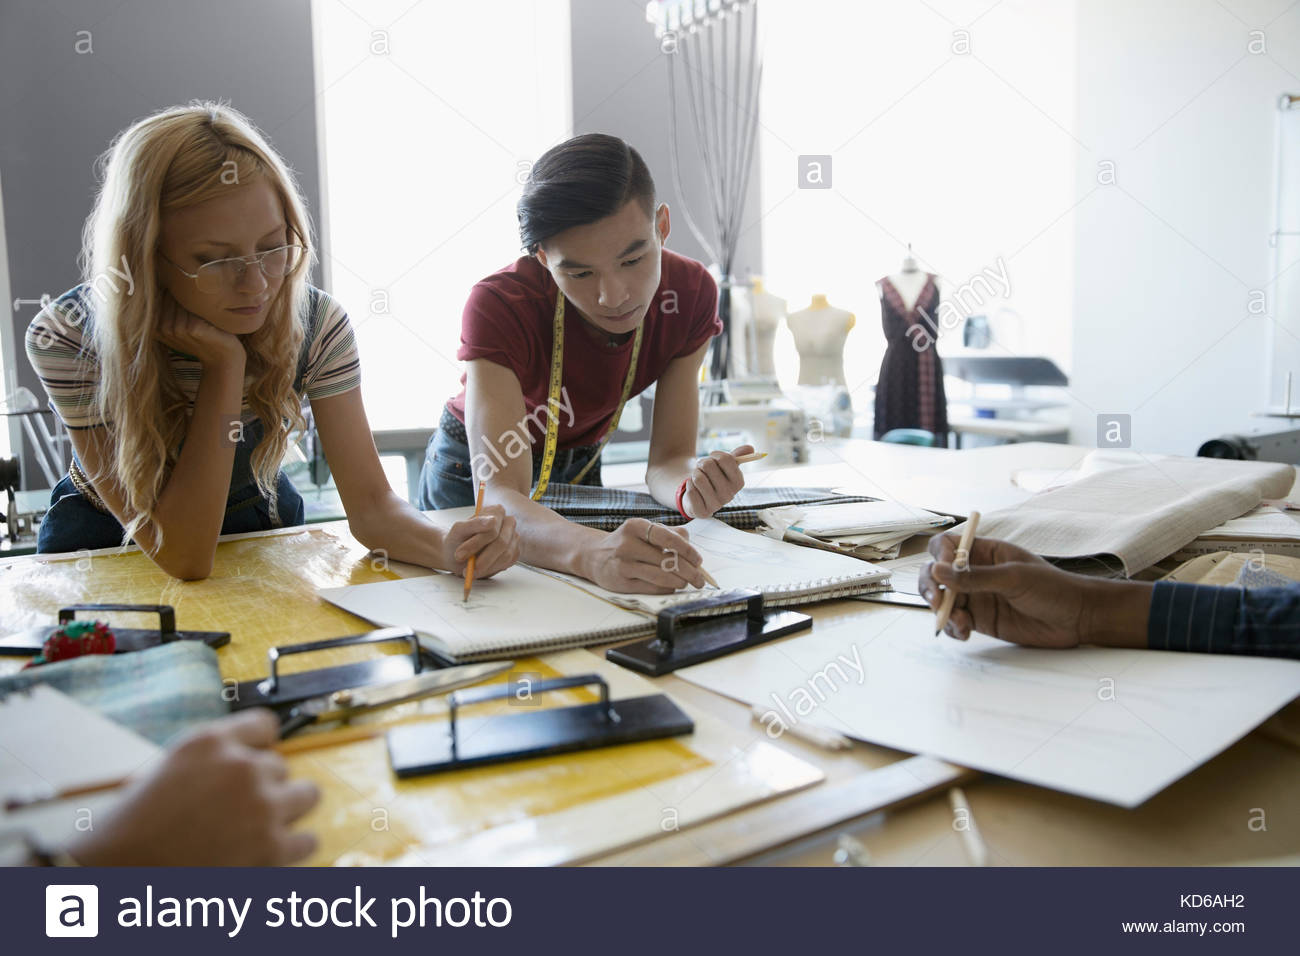 Fashion design students sketching at workbench in studio Stock Photo